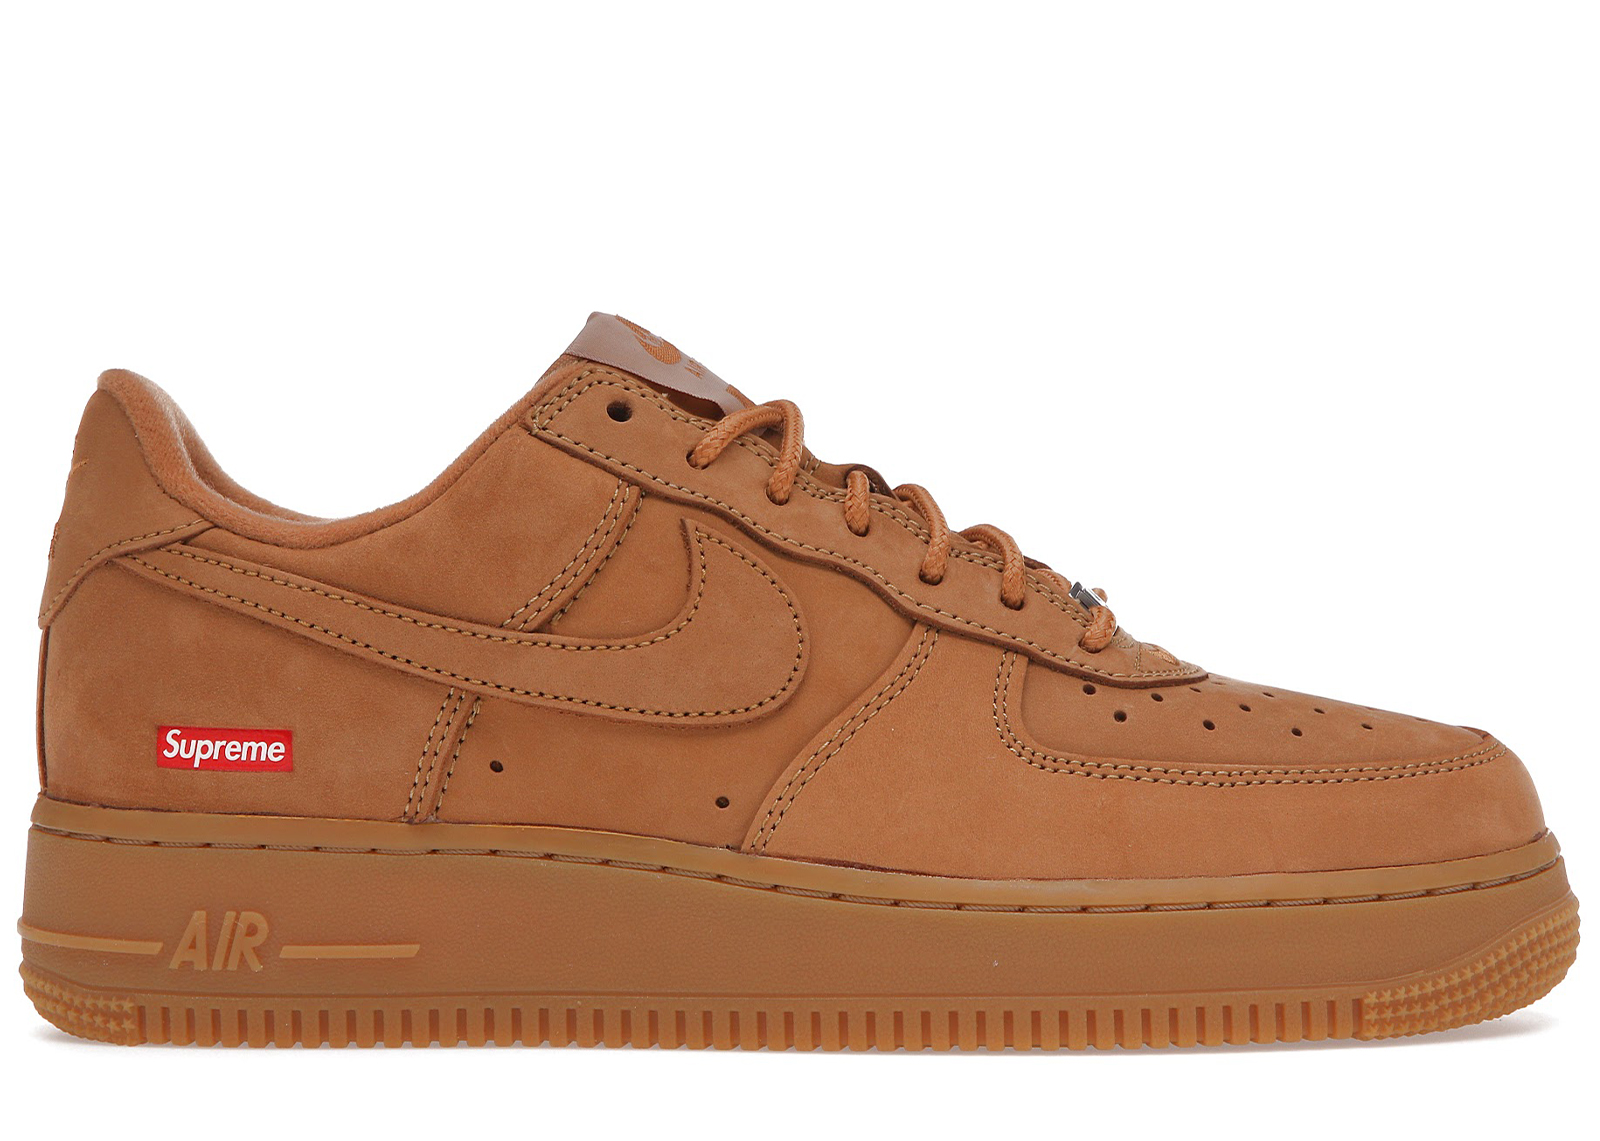 Nike Air Force 1 Low SP Supreme Wheat Men's - DN1555-200 - US